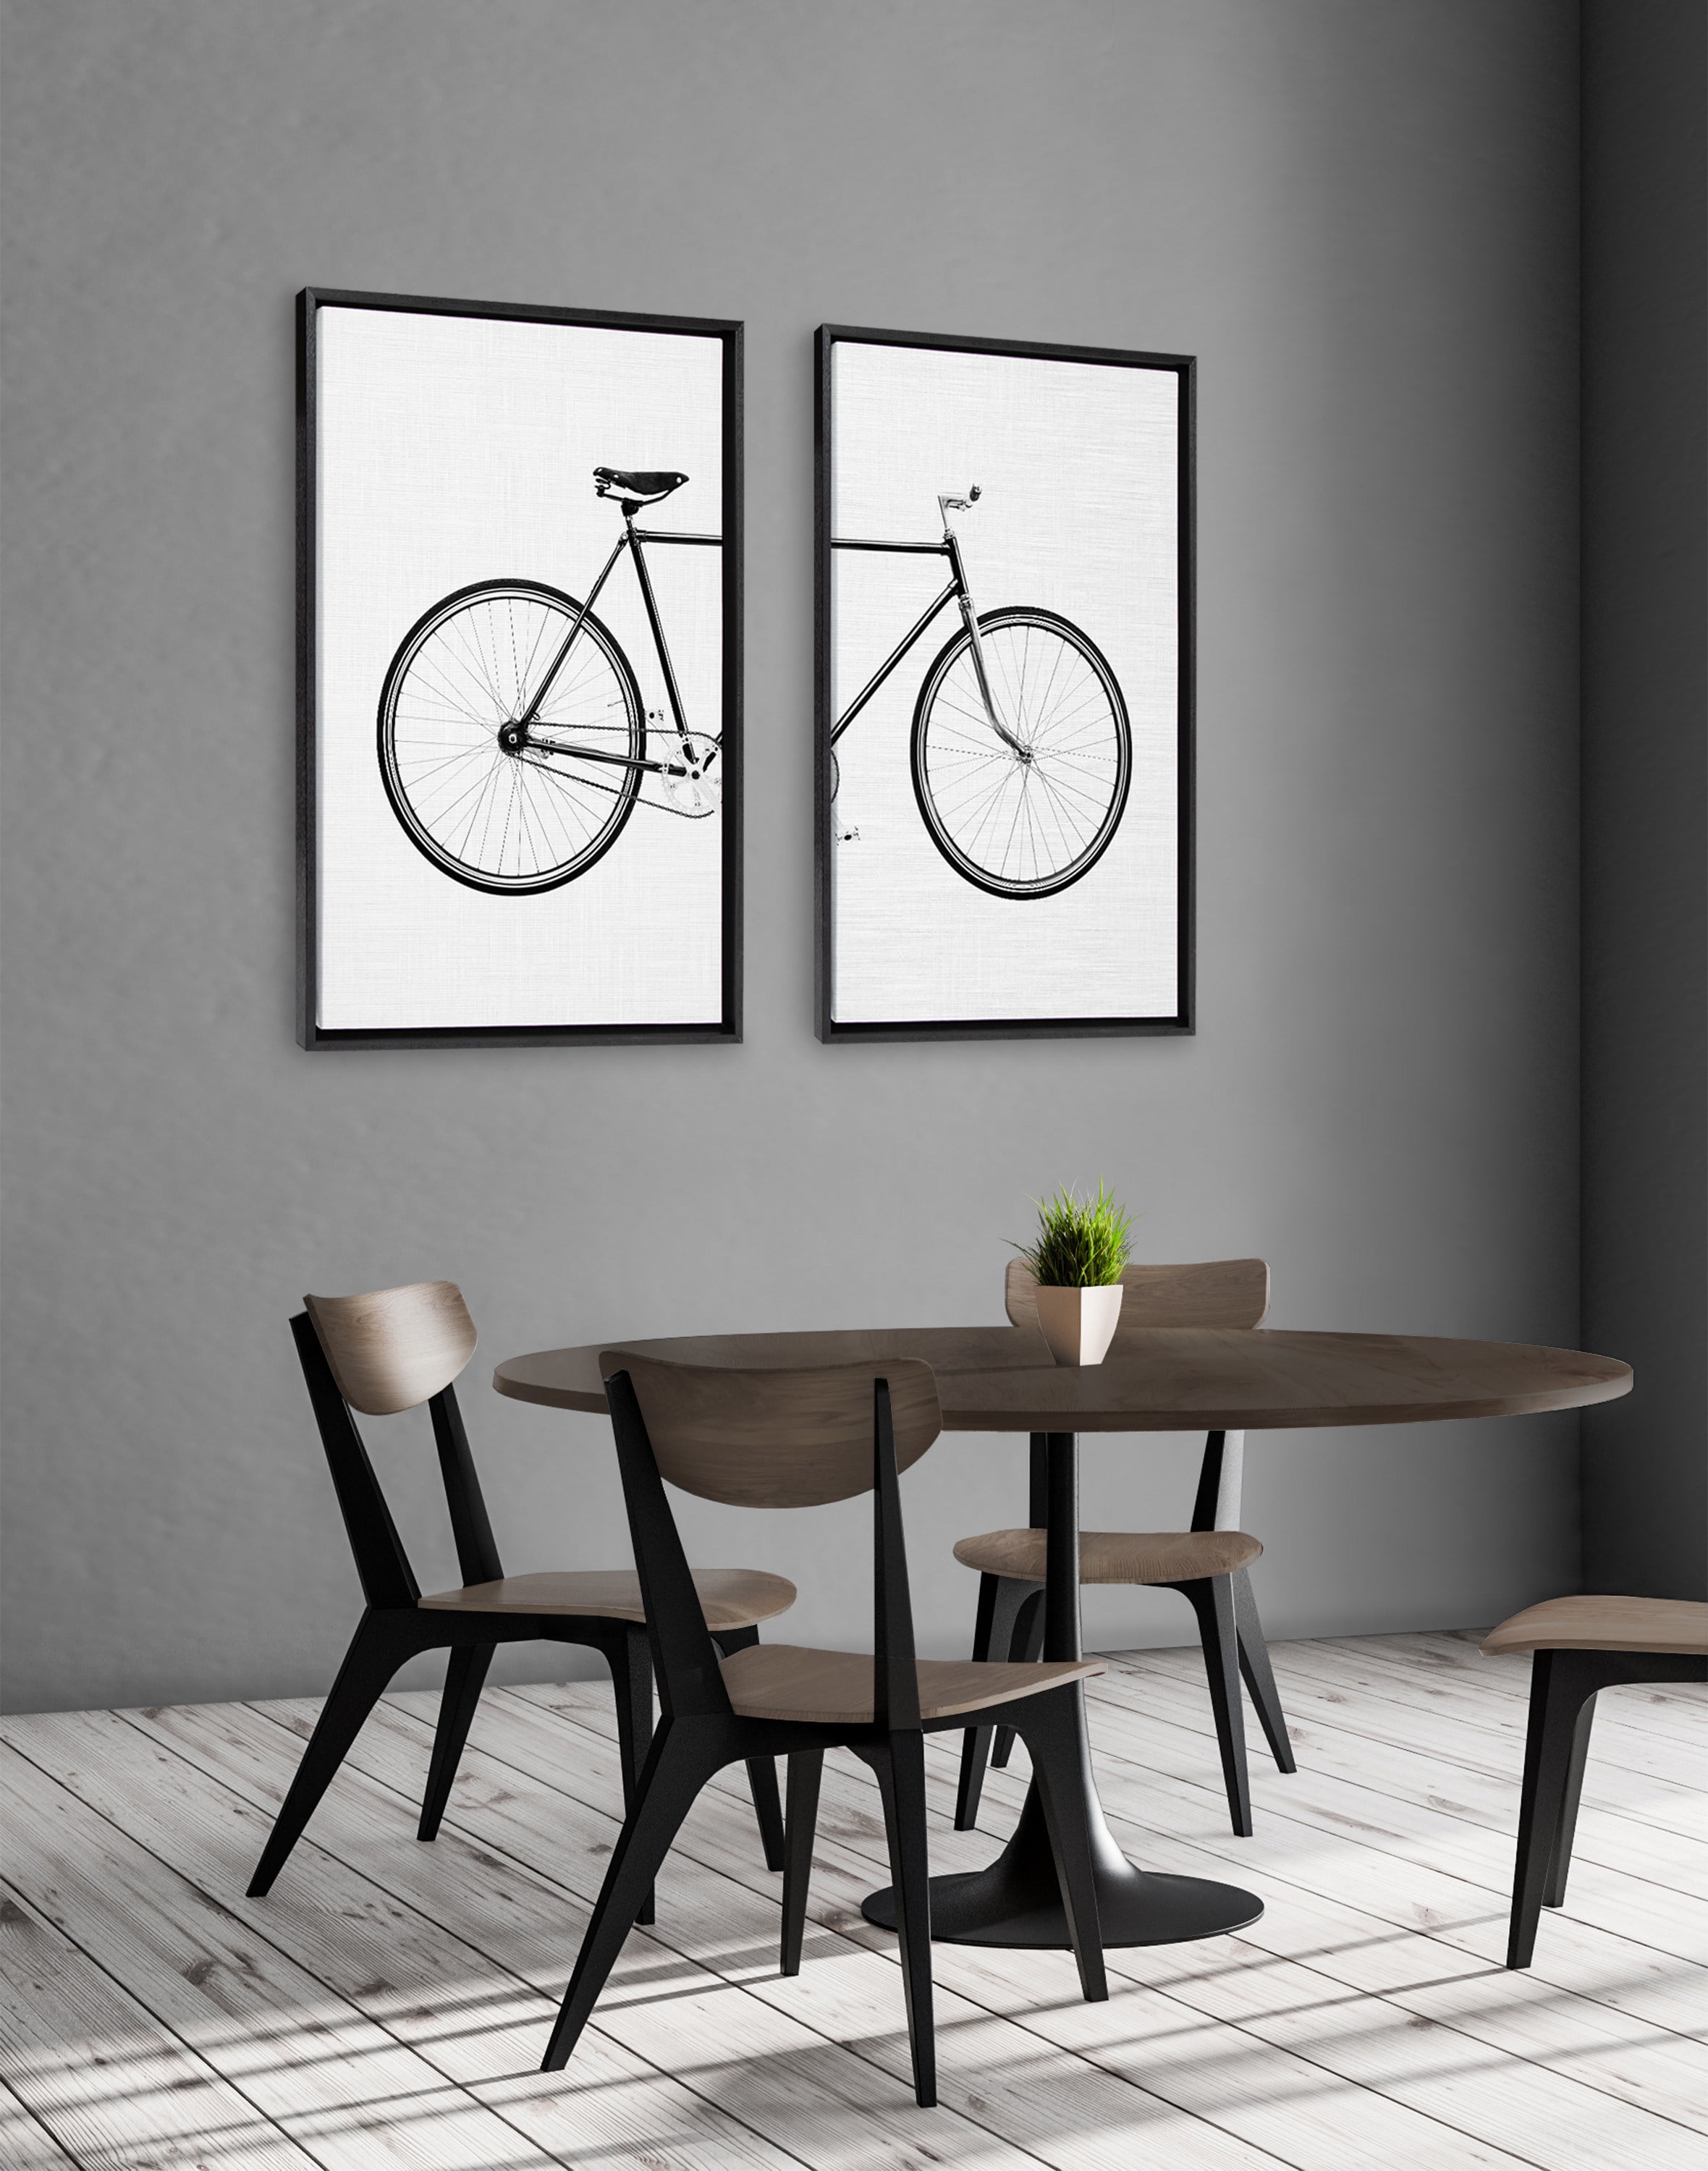 Kate and Laurel Sylvie Bicycle Framed Canvas Wall Art by SImon Te of Tai  Prints, Set of 2, 23x33 Black, Whimsical Wall Decor